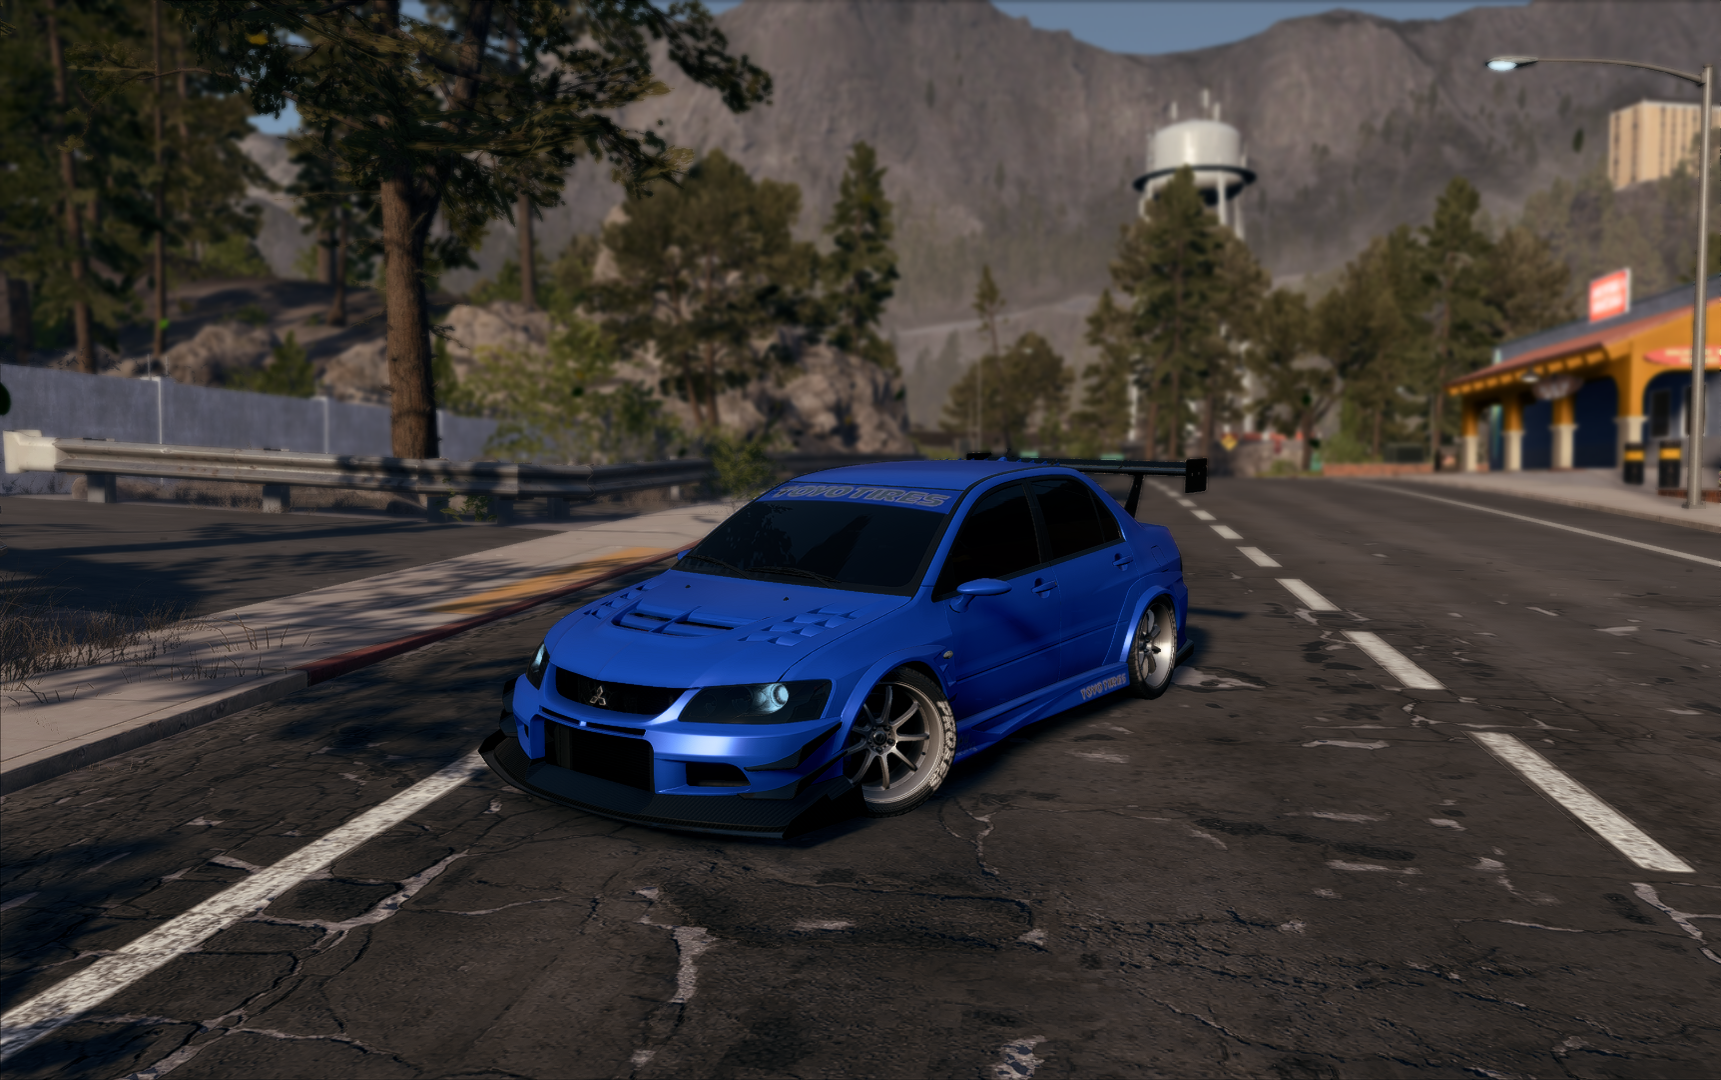 Mitsubishi Lancer Evolution IX Need For Speed Payback Video Games 1721x1080